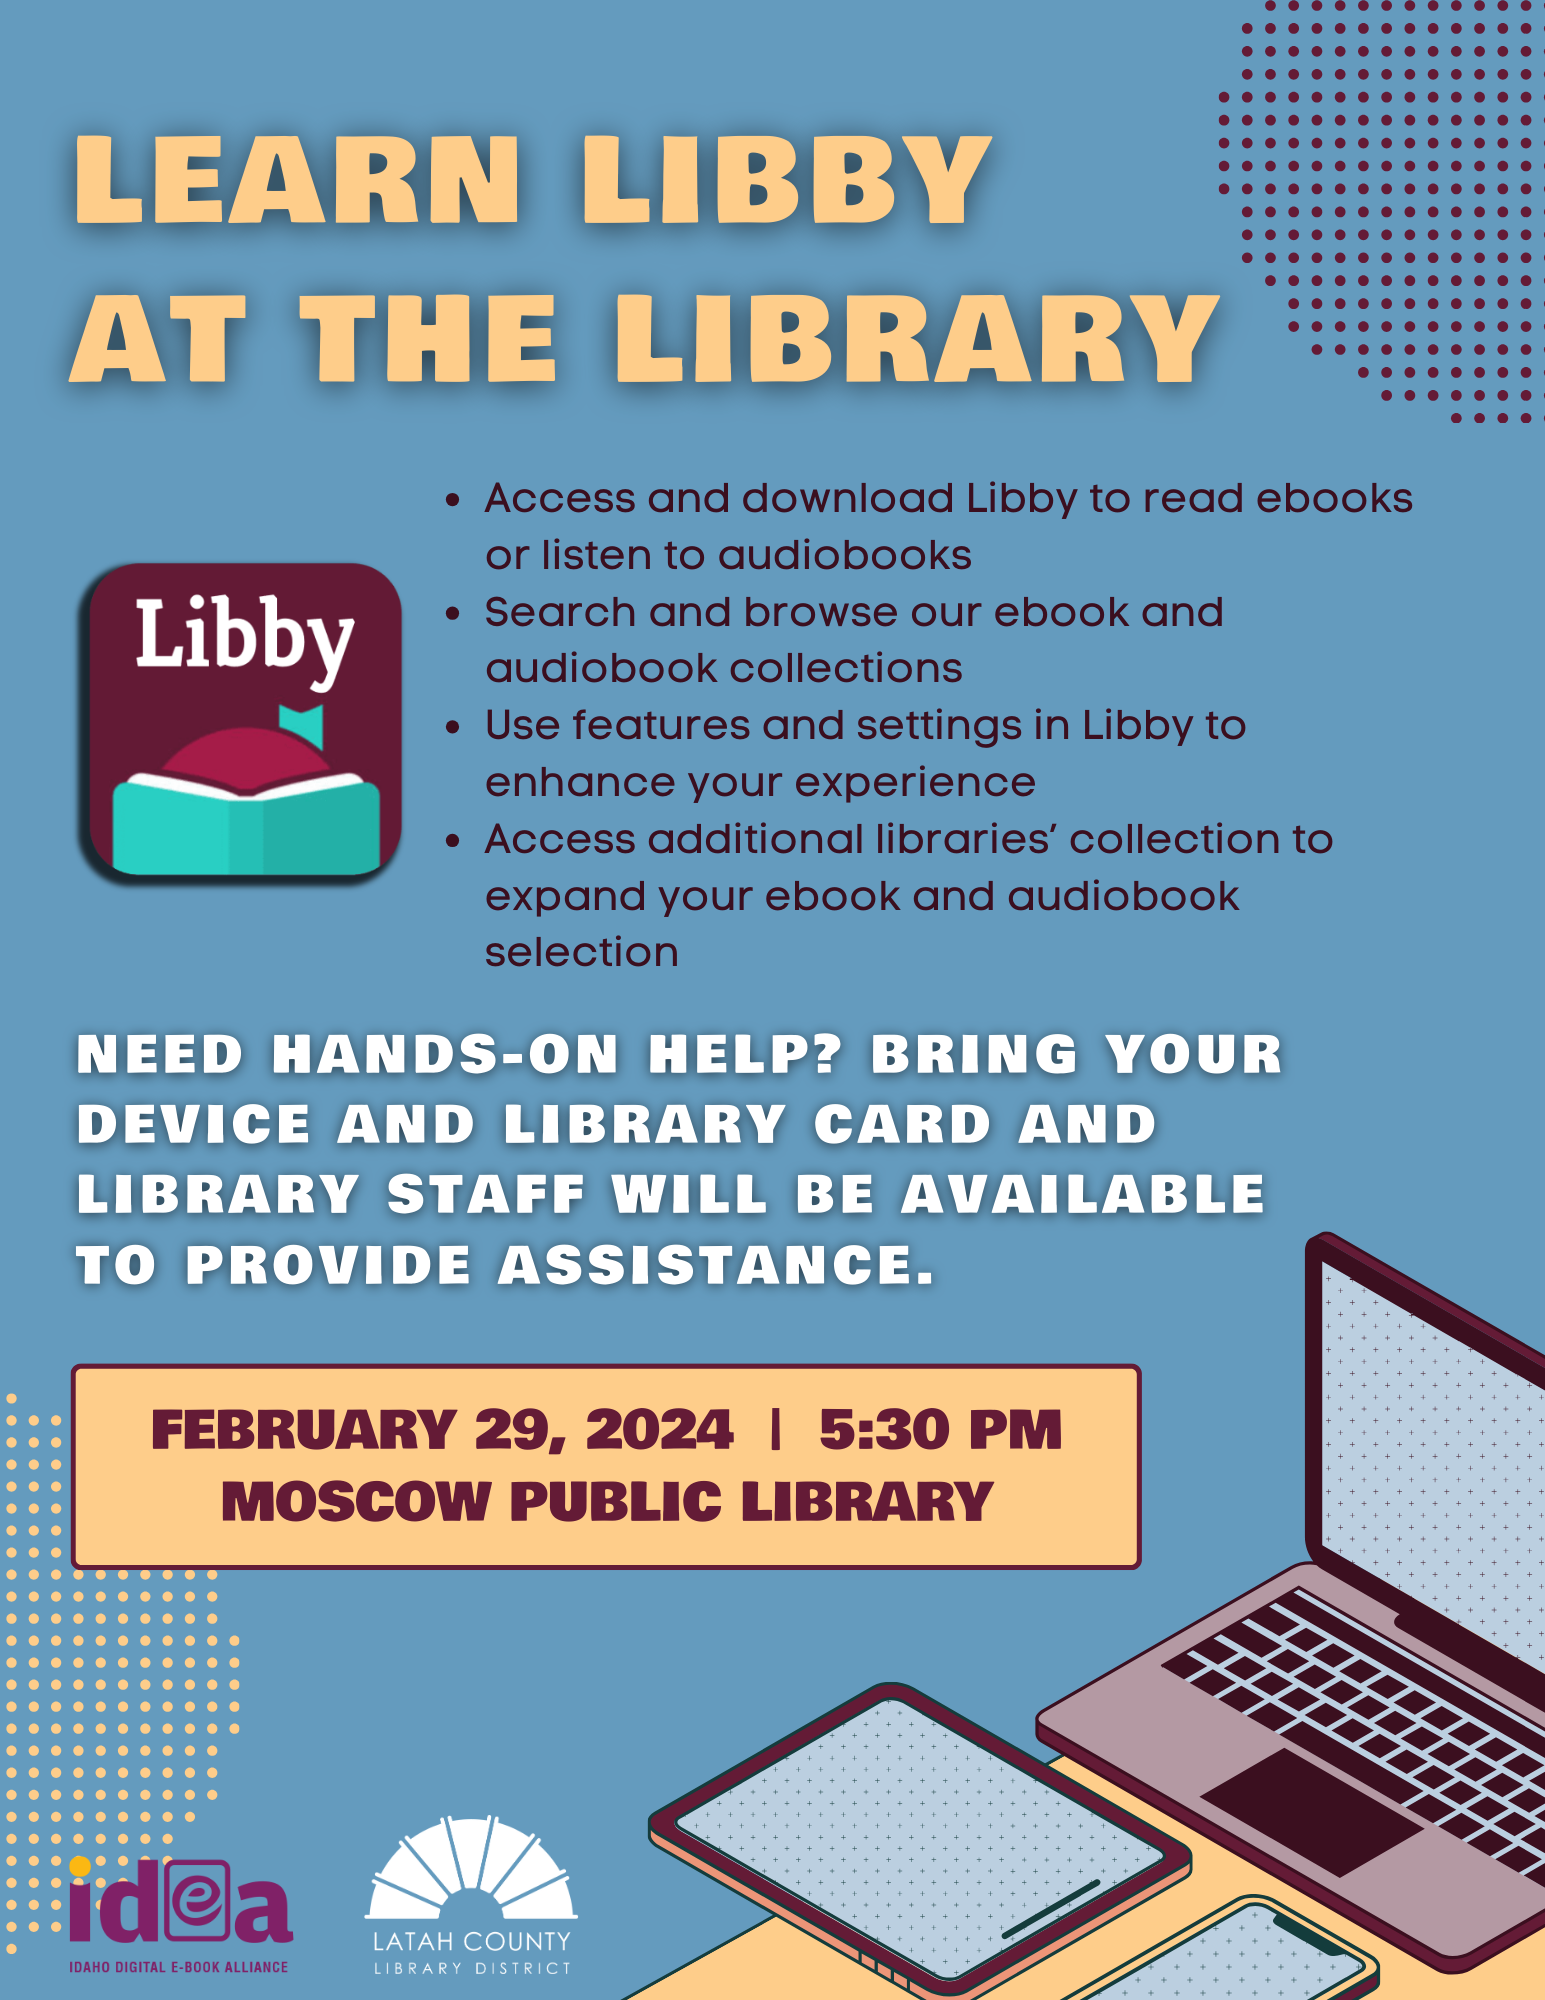 Learn Libby at the Library!